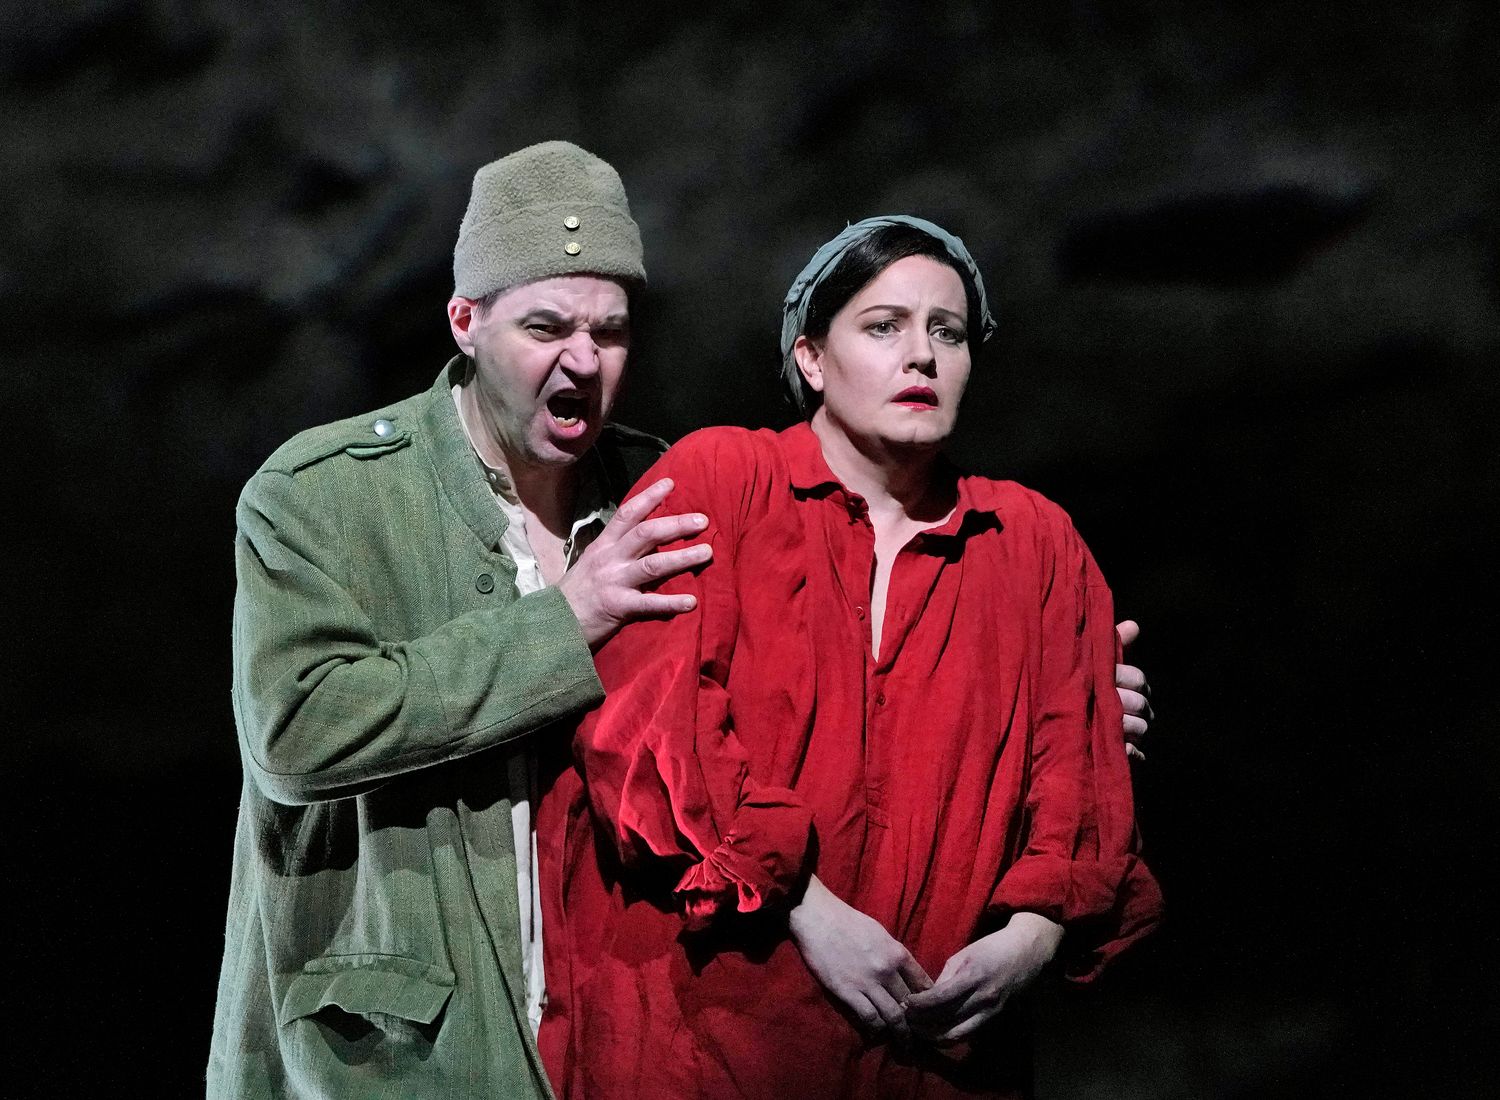 Which Term Best Describes The Style Of The Opera Wozzeck?